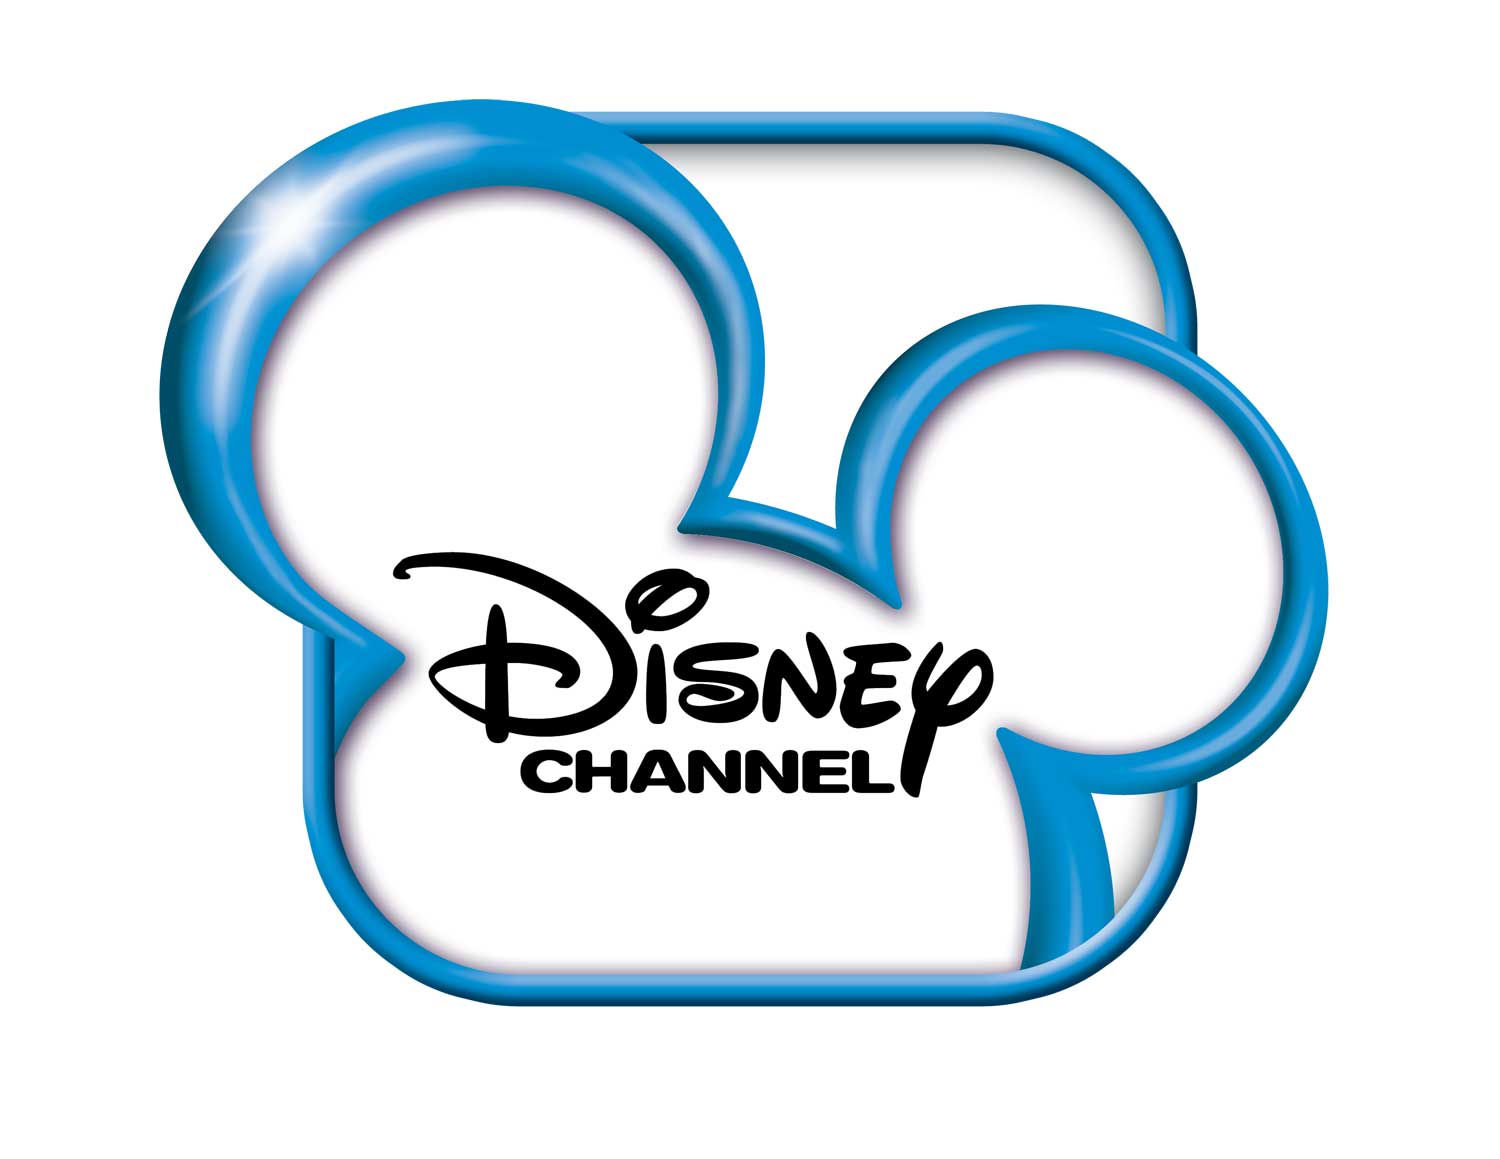 Disney Channel France  Astra Frequency  Freqode  TV 